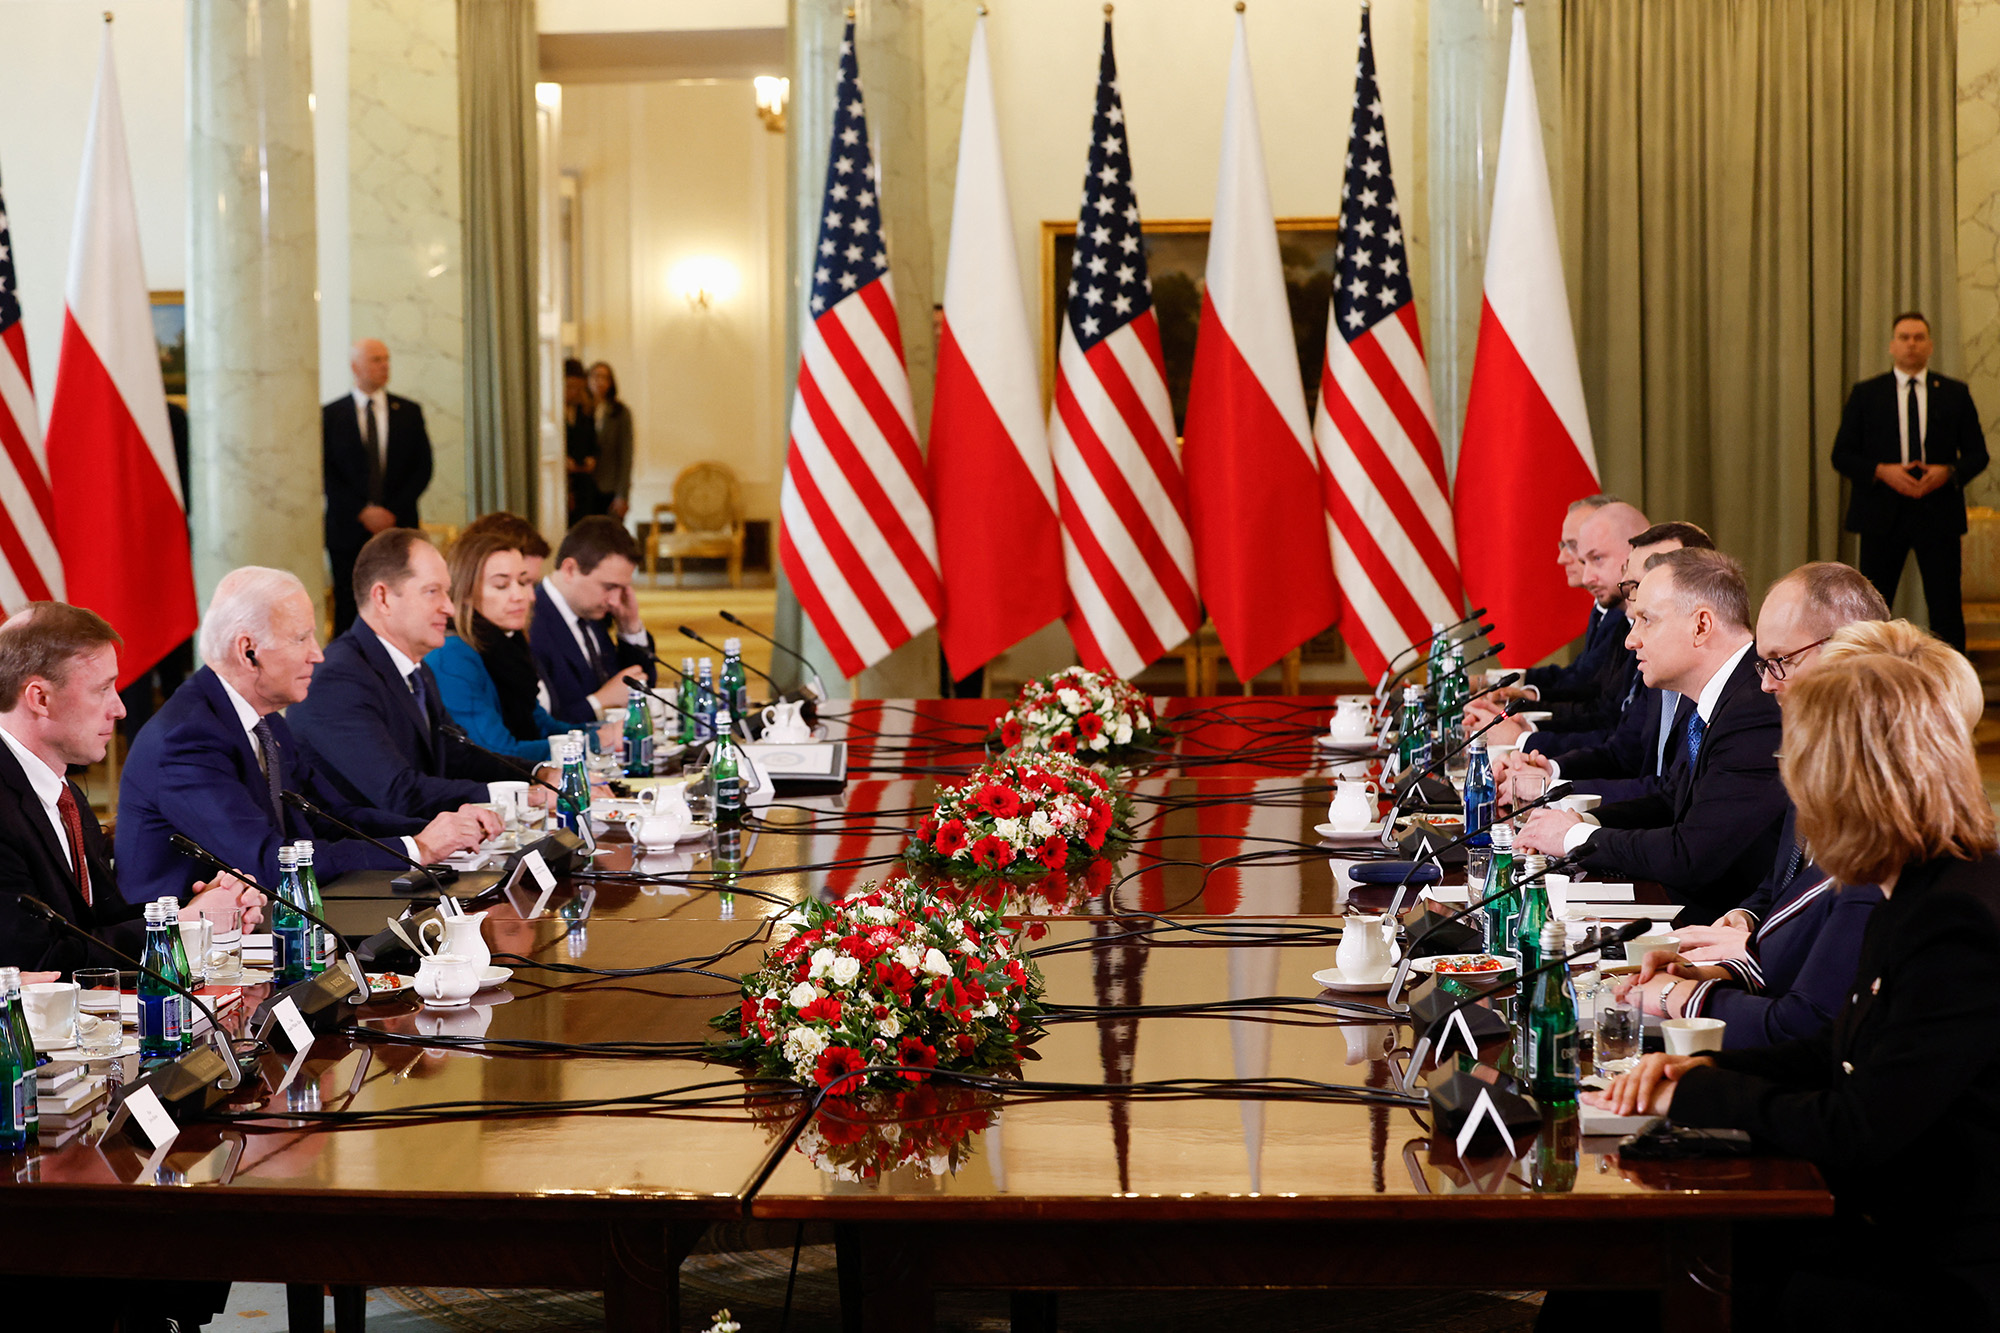 US President Joe Biden and Polish President Andrzej Duda participate in a bilateral meeting to discuss collective efforts to support Ukraine and bolster NATO's deterrence at the Presidential Palace in Warsaw, Poland, on February 21.